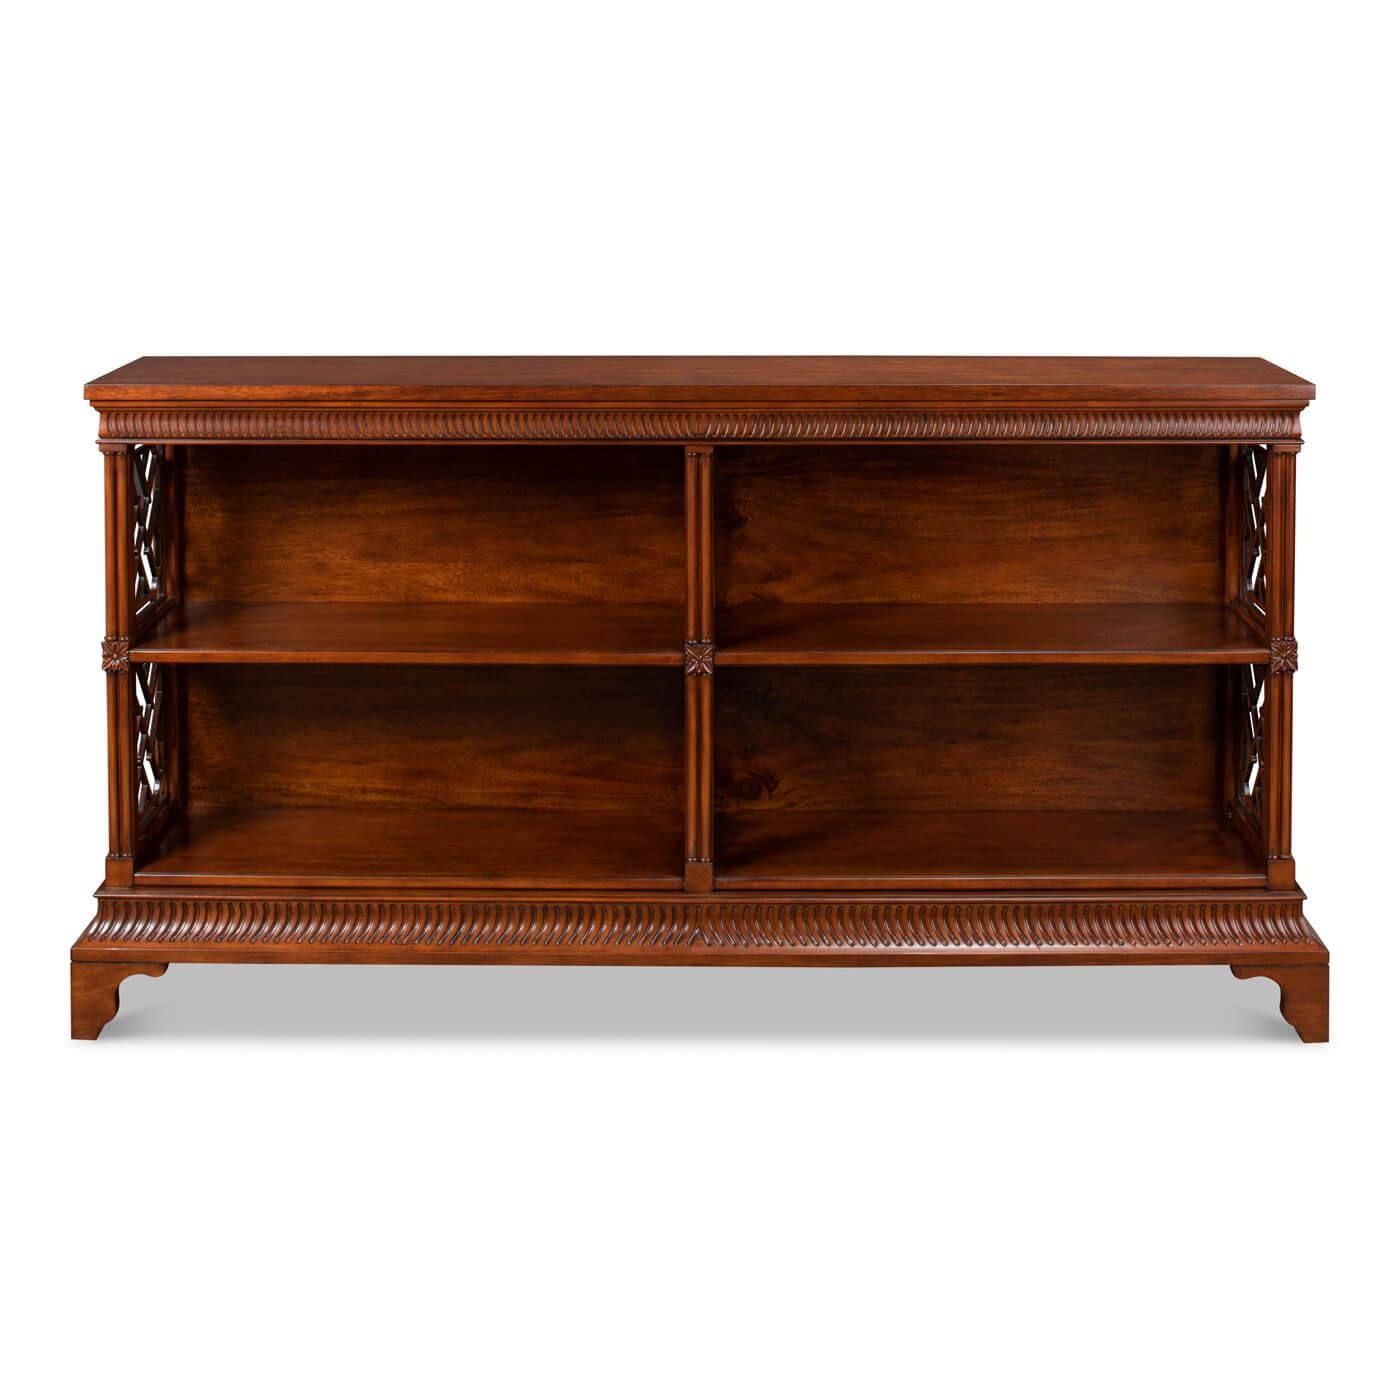 Chinese Chippendale style open bookcase with a walnut finish and with open fretwork trellis sides. A stately piece perfect for book storage and display. Inspired by popular 18th-century English designs, this piece reminds you of the elegant